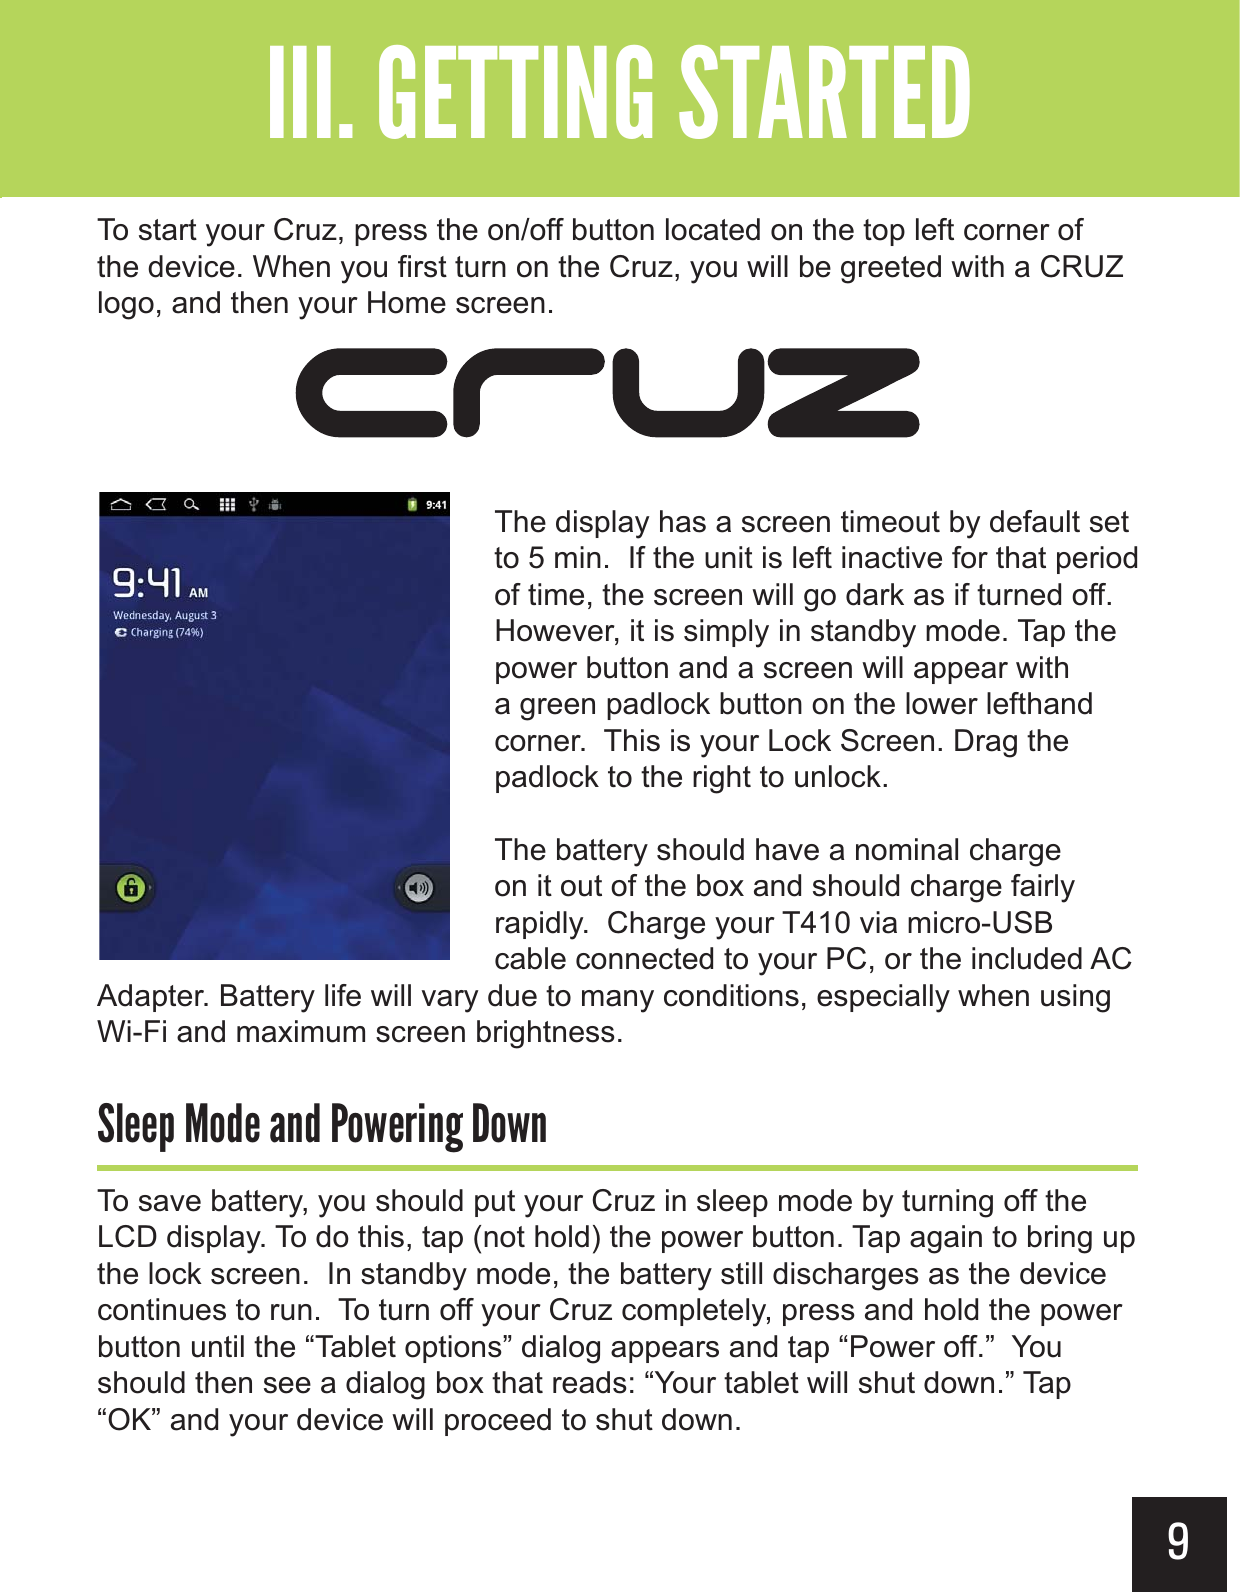 9To start your Cruz, press the on/off button located on the top left corner of the device. When you first turn on the Cruz, you will be greeted with a CRUZ logo, and then your Home screen.The display has a screen timeout by default set to 5 min.  If the unit is left inactive for that period of time, the screen will go dark as if turned off. However, it is simply in standby mode. Tap the power button and a screen will appear with a green padlock button on the lower lefthand corner.  This is your Lock Screen. Drag the padlock to the right to unlock. The battery should have a nominal charge on it out of the box and should charge fairly rapidly.  Charge your T410 via micro-USB cable connected to your PC, or the included AC Adapter. Battery life will vary due to many conditions, especially when using Wi-Fi and maximum screen brightness.&quot;&quot;)&gt;&apos;&quot;&gt;(&gt;&apos;0&quot;+$#&gt;&apos;0To save battery, you should put your Cruz in sleep mode by turning off the LCD display. To do this, tap (not hold) the power button. Tap again to bring up the lock screen.  In standby mode, the battery still discharges as the device continues to run.  To turn off your Cruz completely, press and hold the power button until the “Tablet options” dialog appears and tap “Power off.”  You should then see a dialog box that reads: “Your tablet will shut down.” Tap “OK” and your device will proceed to shut down.&quot;--$#&gt;-(+-&quot;?&gt;&gt; 